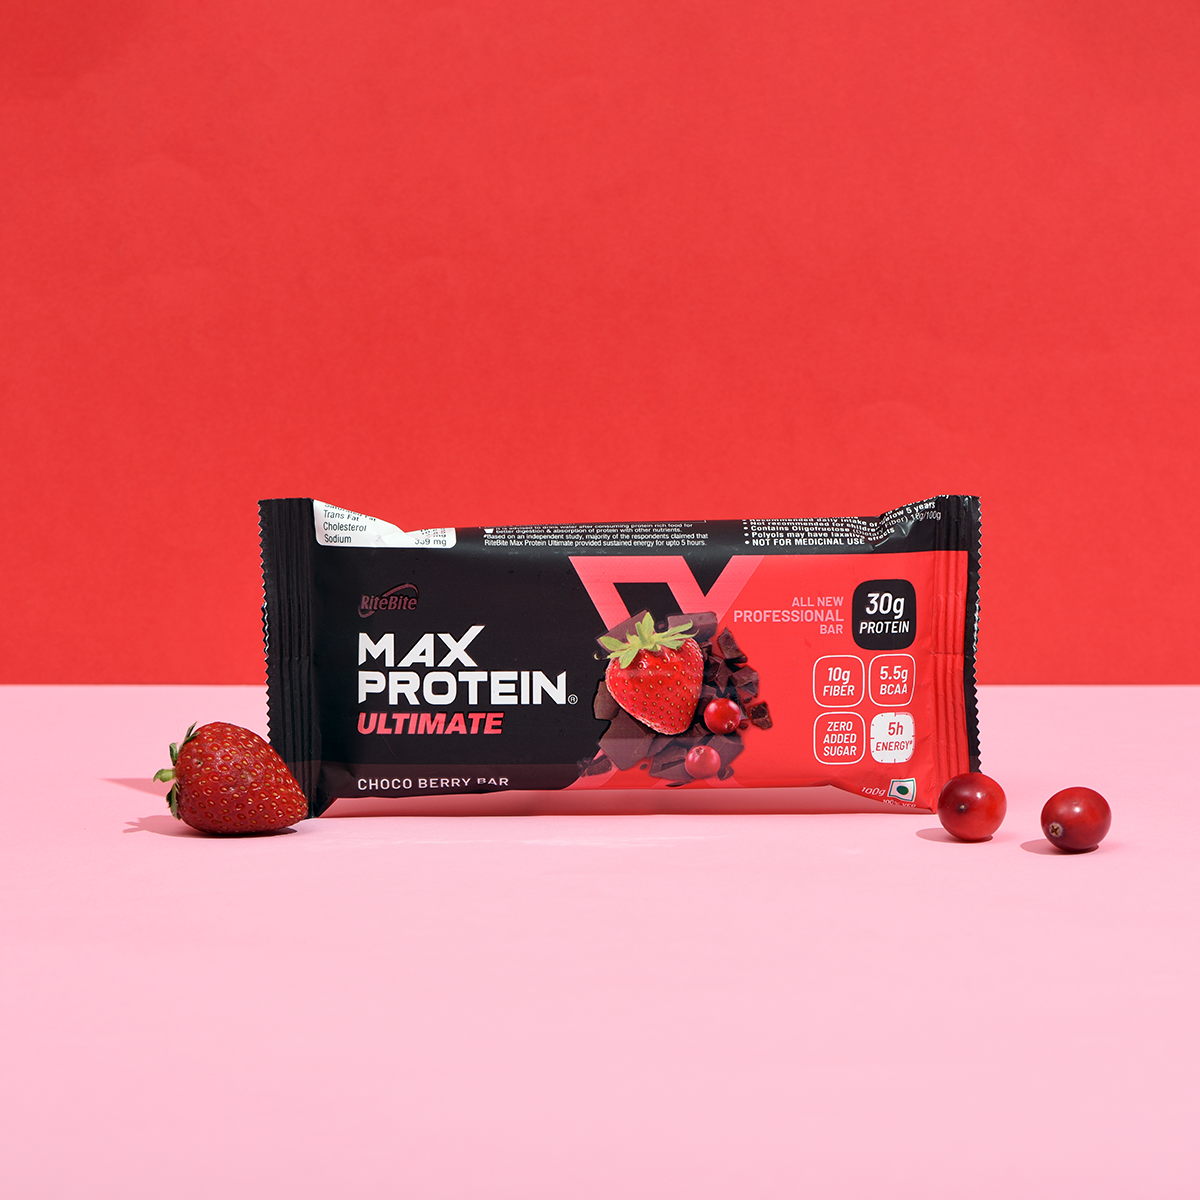 Max Protein Ultimate Choco Berry